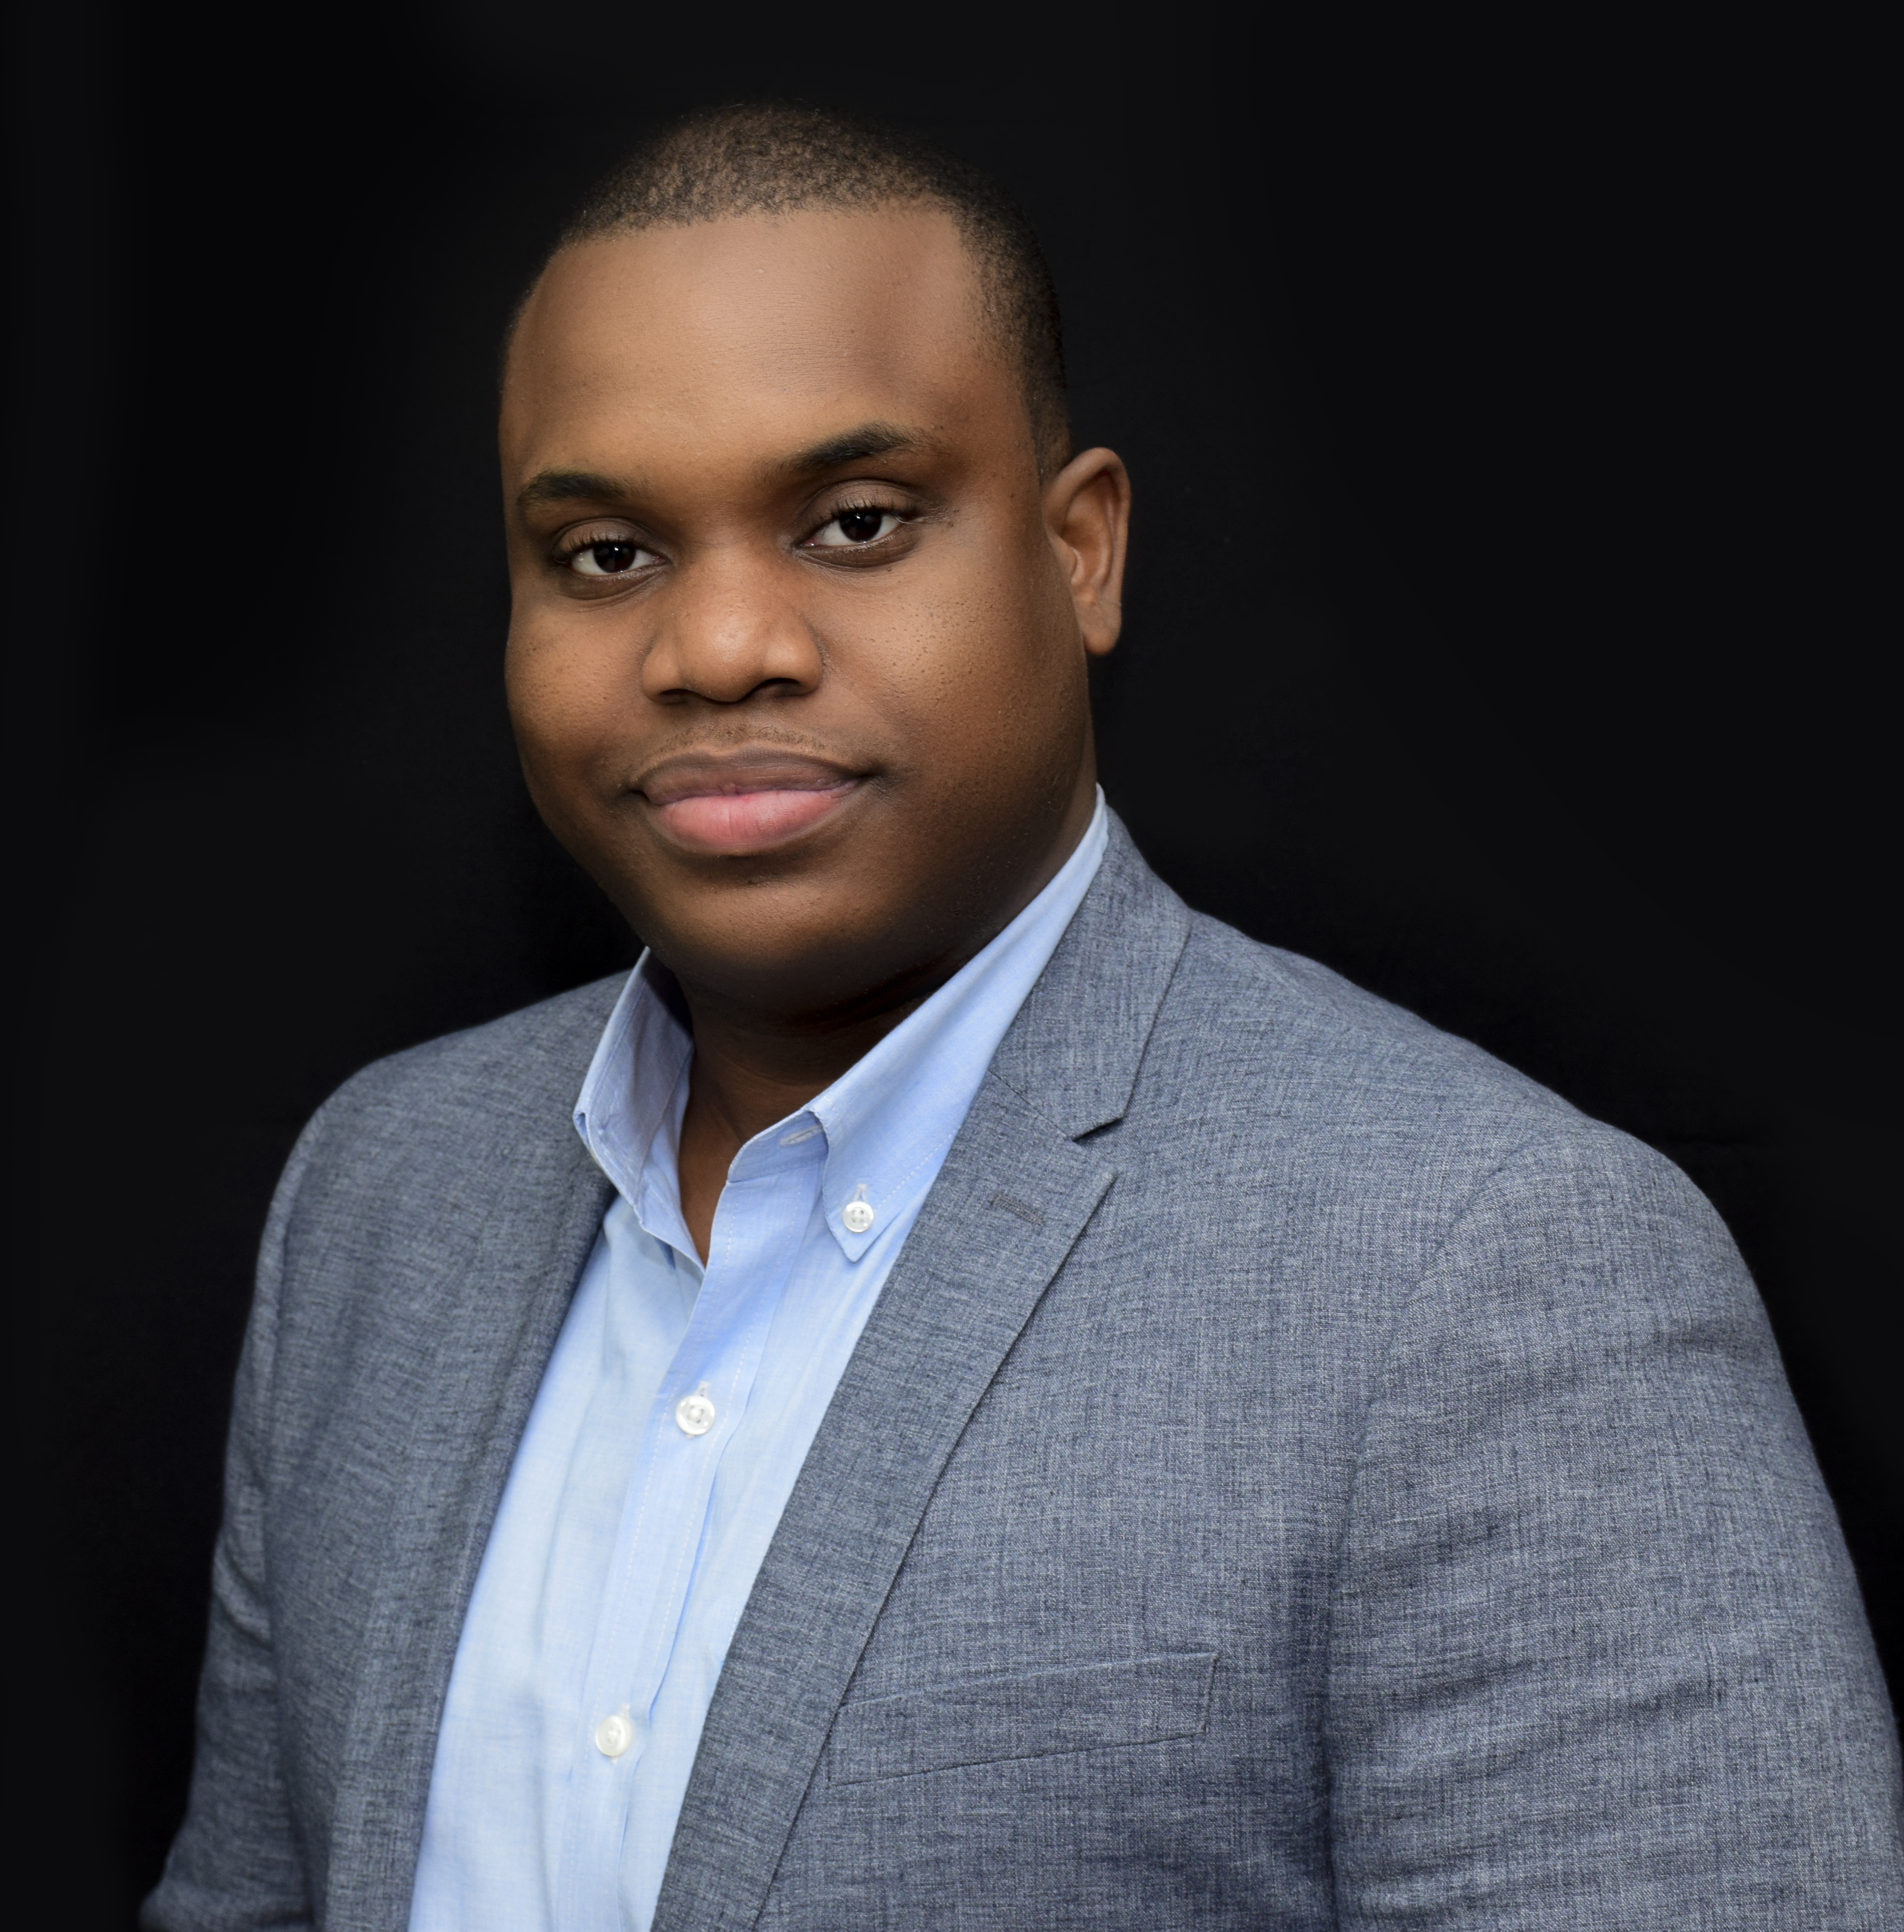 Meet Clifford Dessables From Focused Media – Offering Digital Marketing Services To Small Businesses